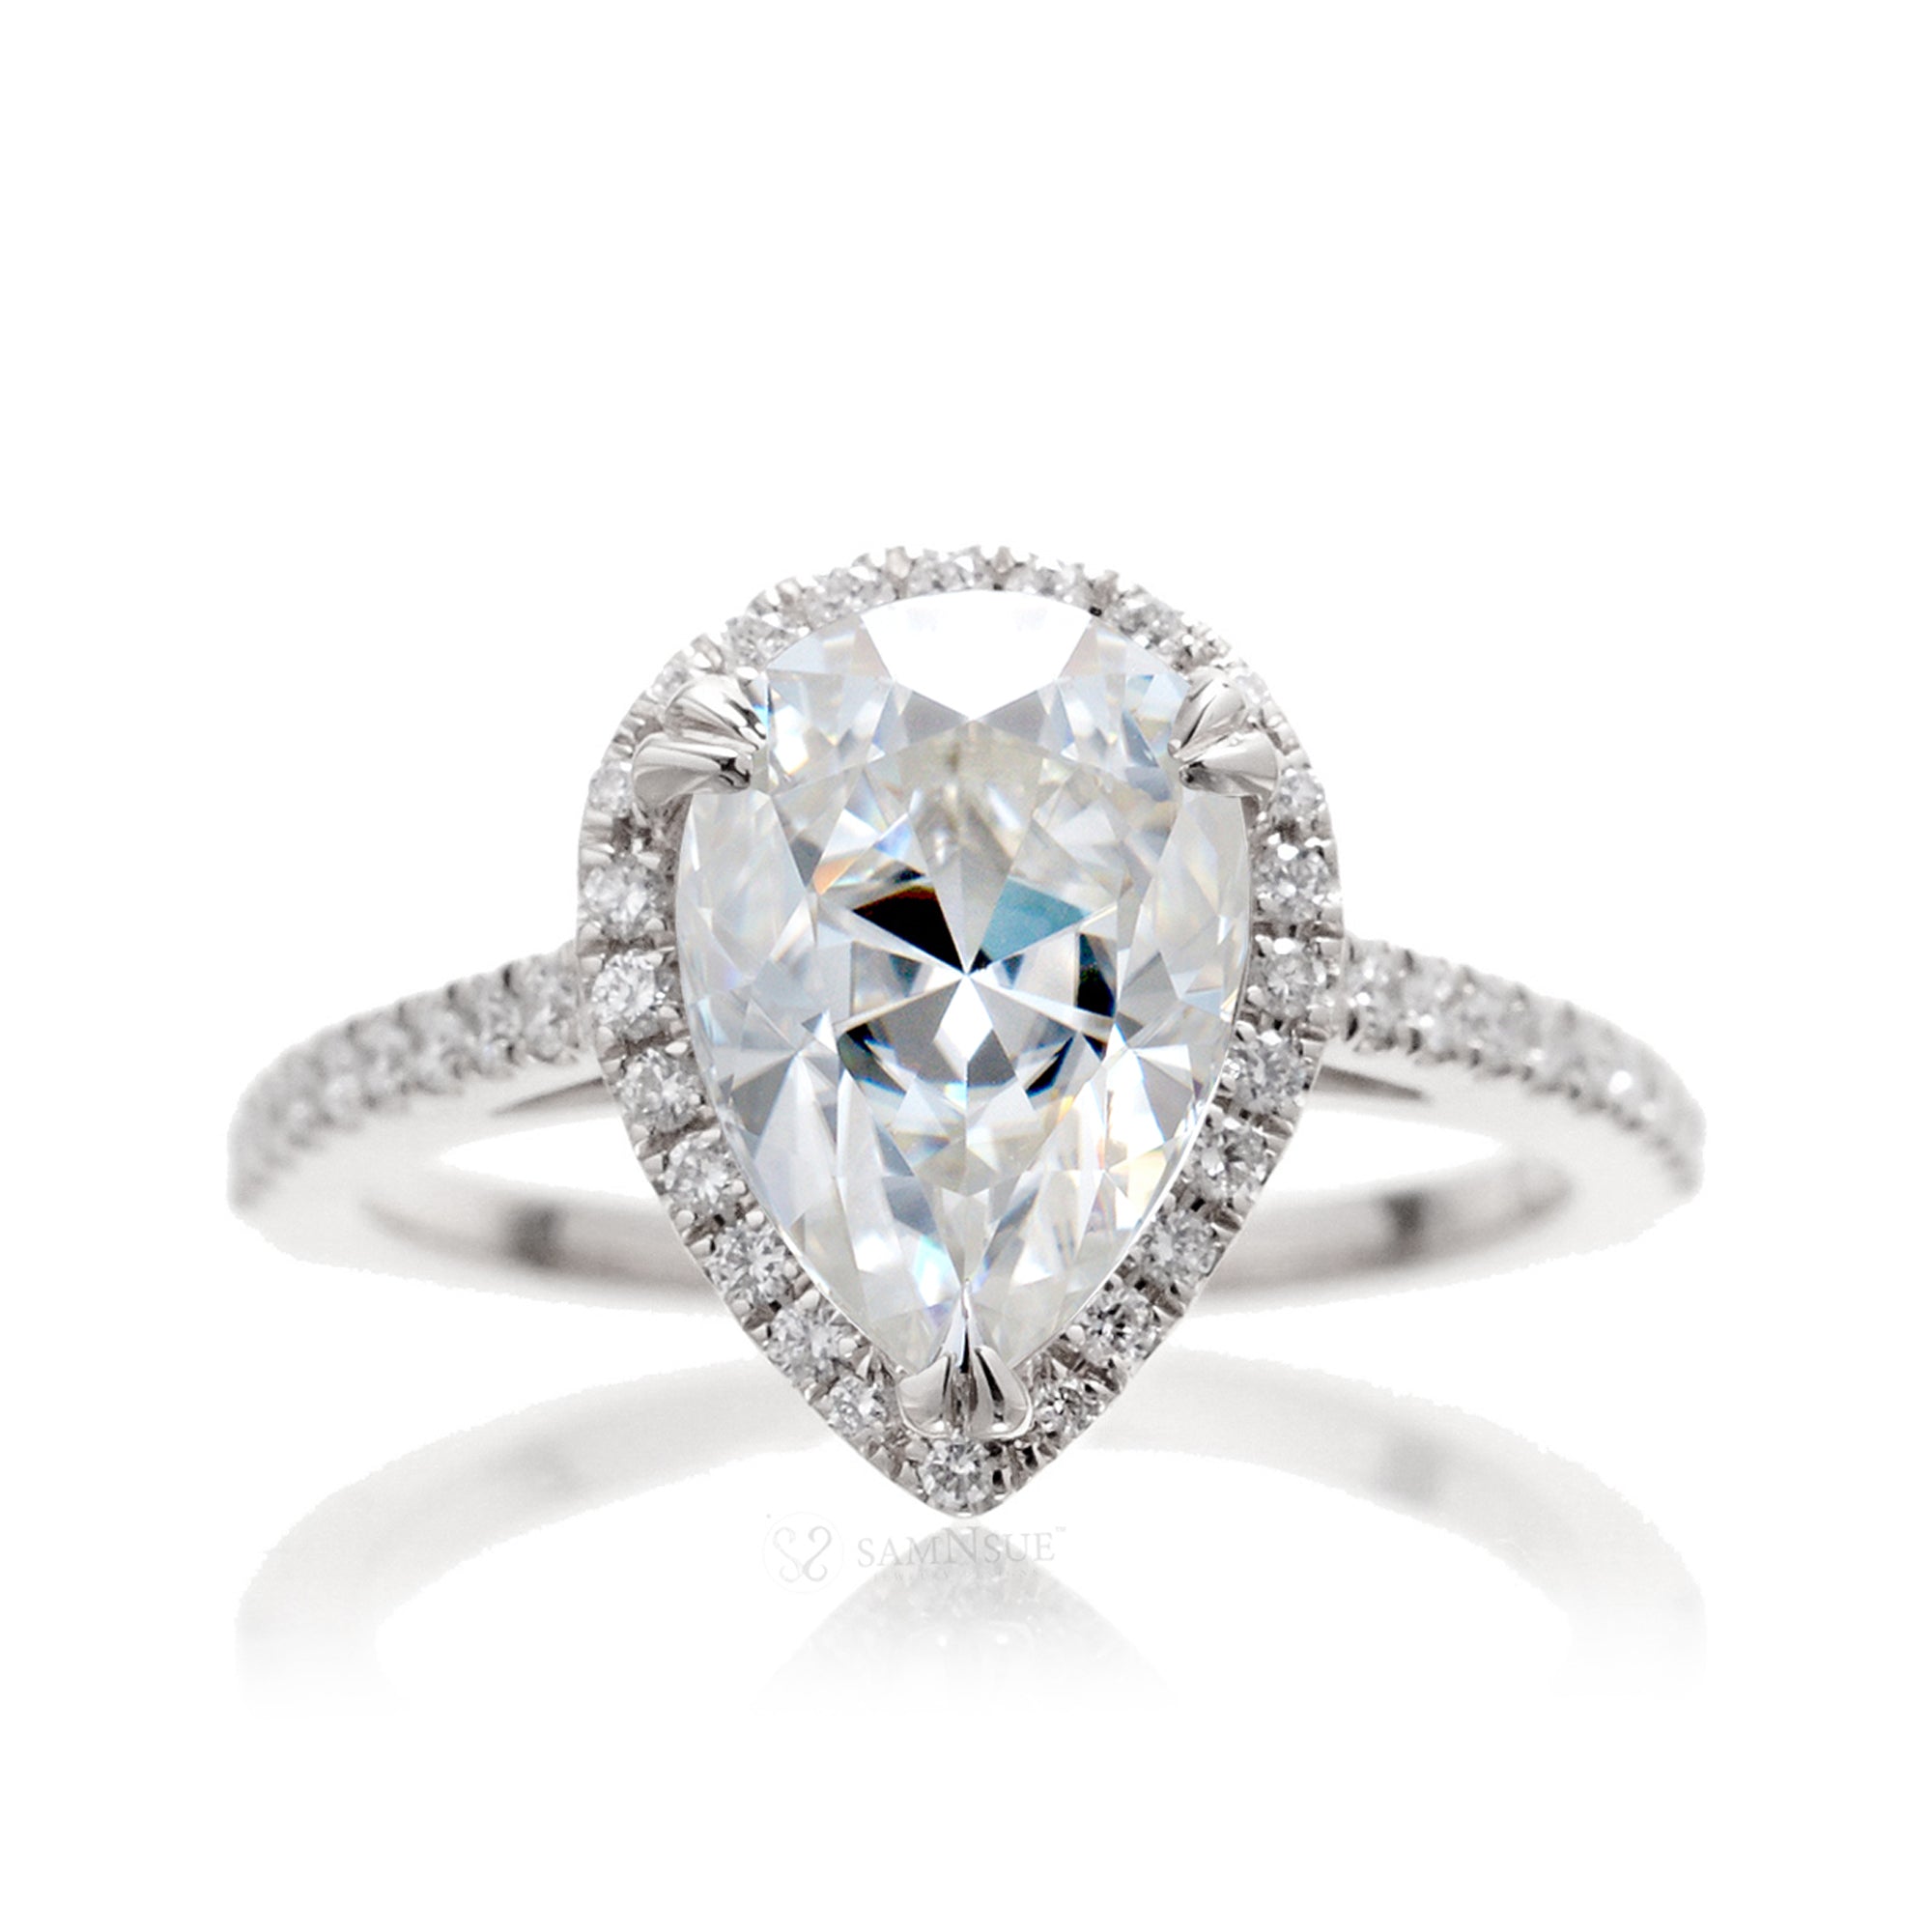 Pear Moissanite Diamond Halo Engagement Ring | The Signature In White Gold Or Platinum